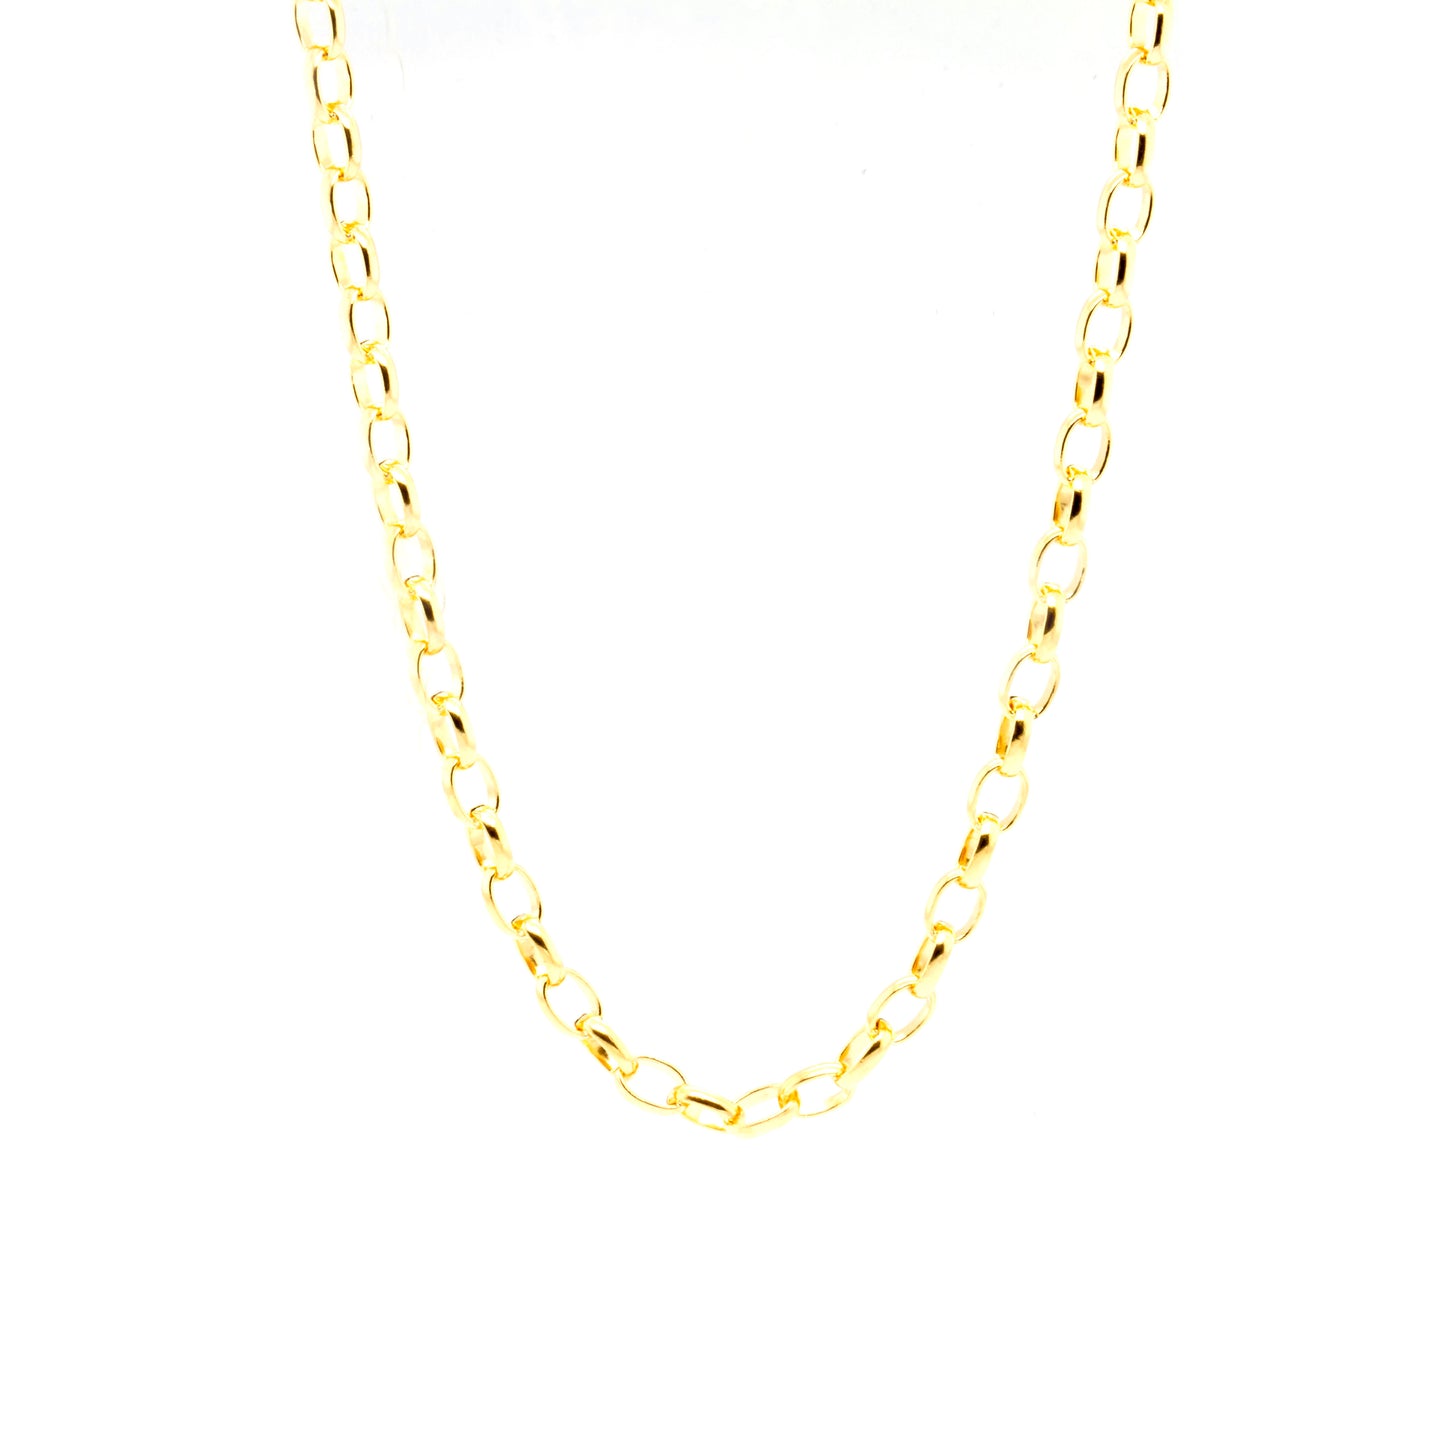 oval chain necklace